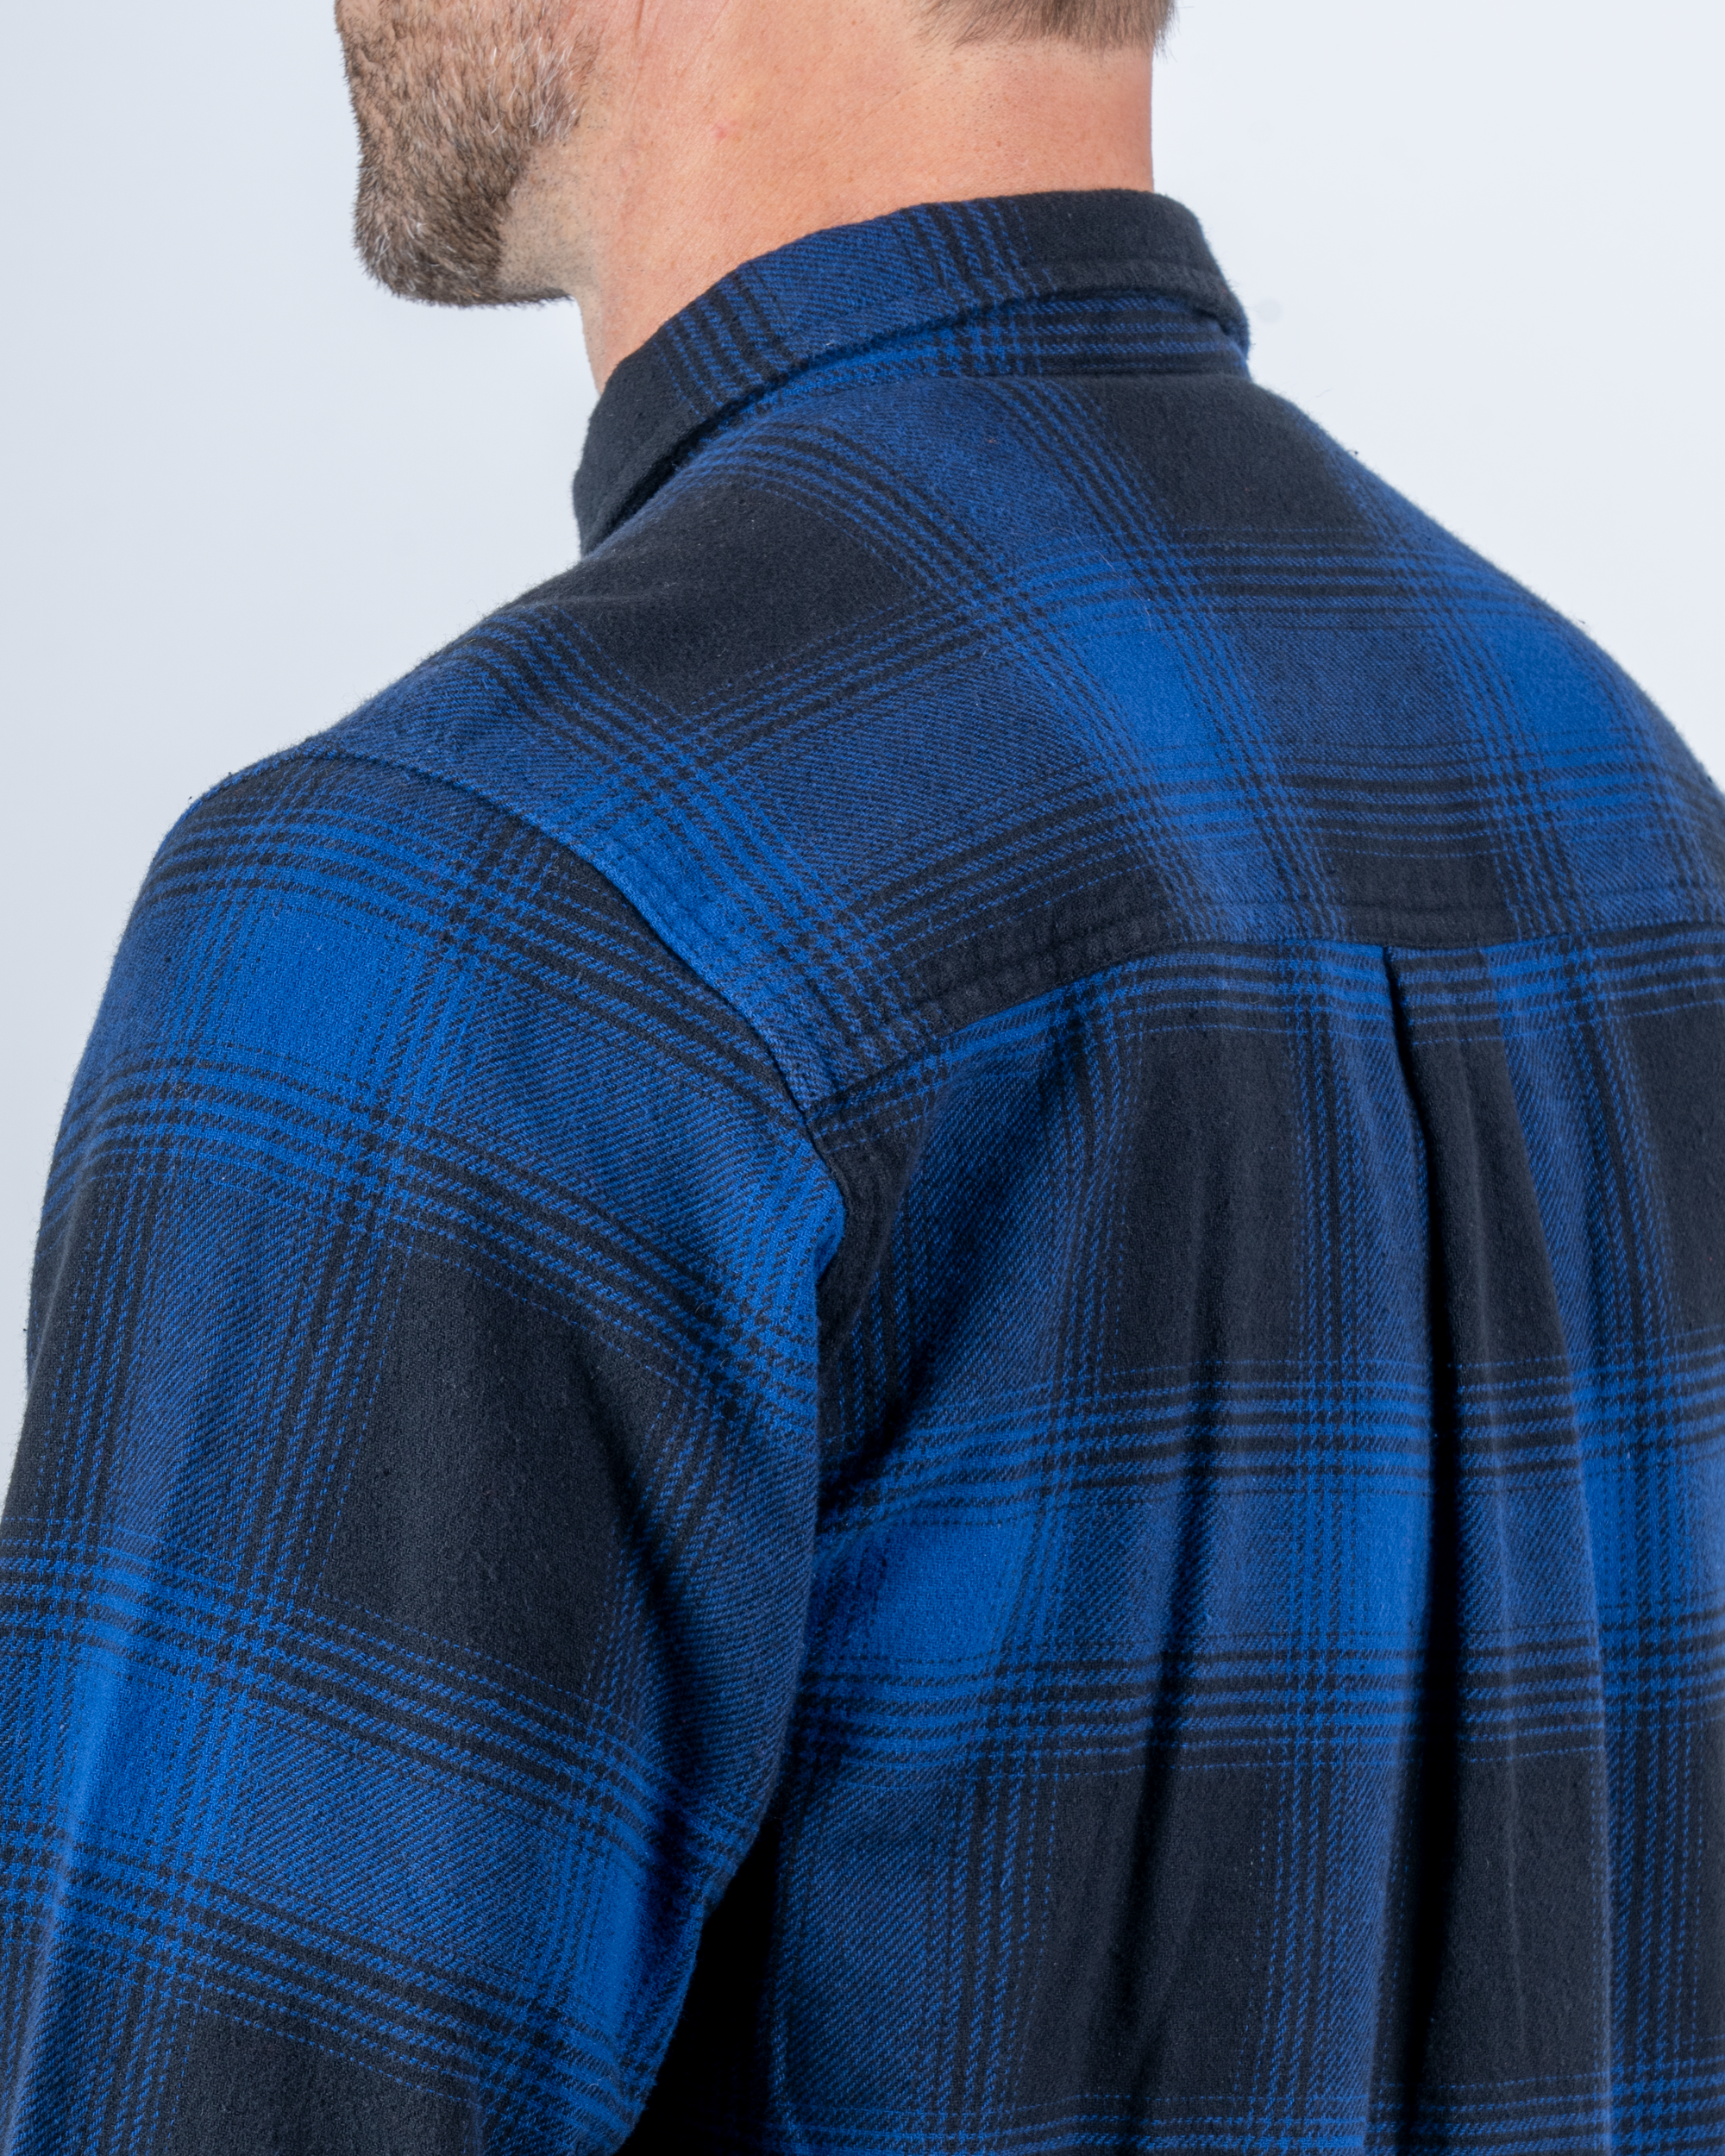 Foreign Rider Co Organic Cotton Blue Flannel Plaid Long Sleeve Button Up Shirt Back Shoulder and Collar Detail